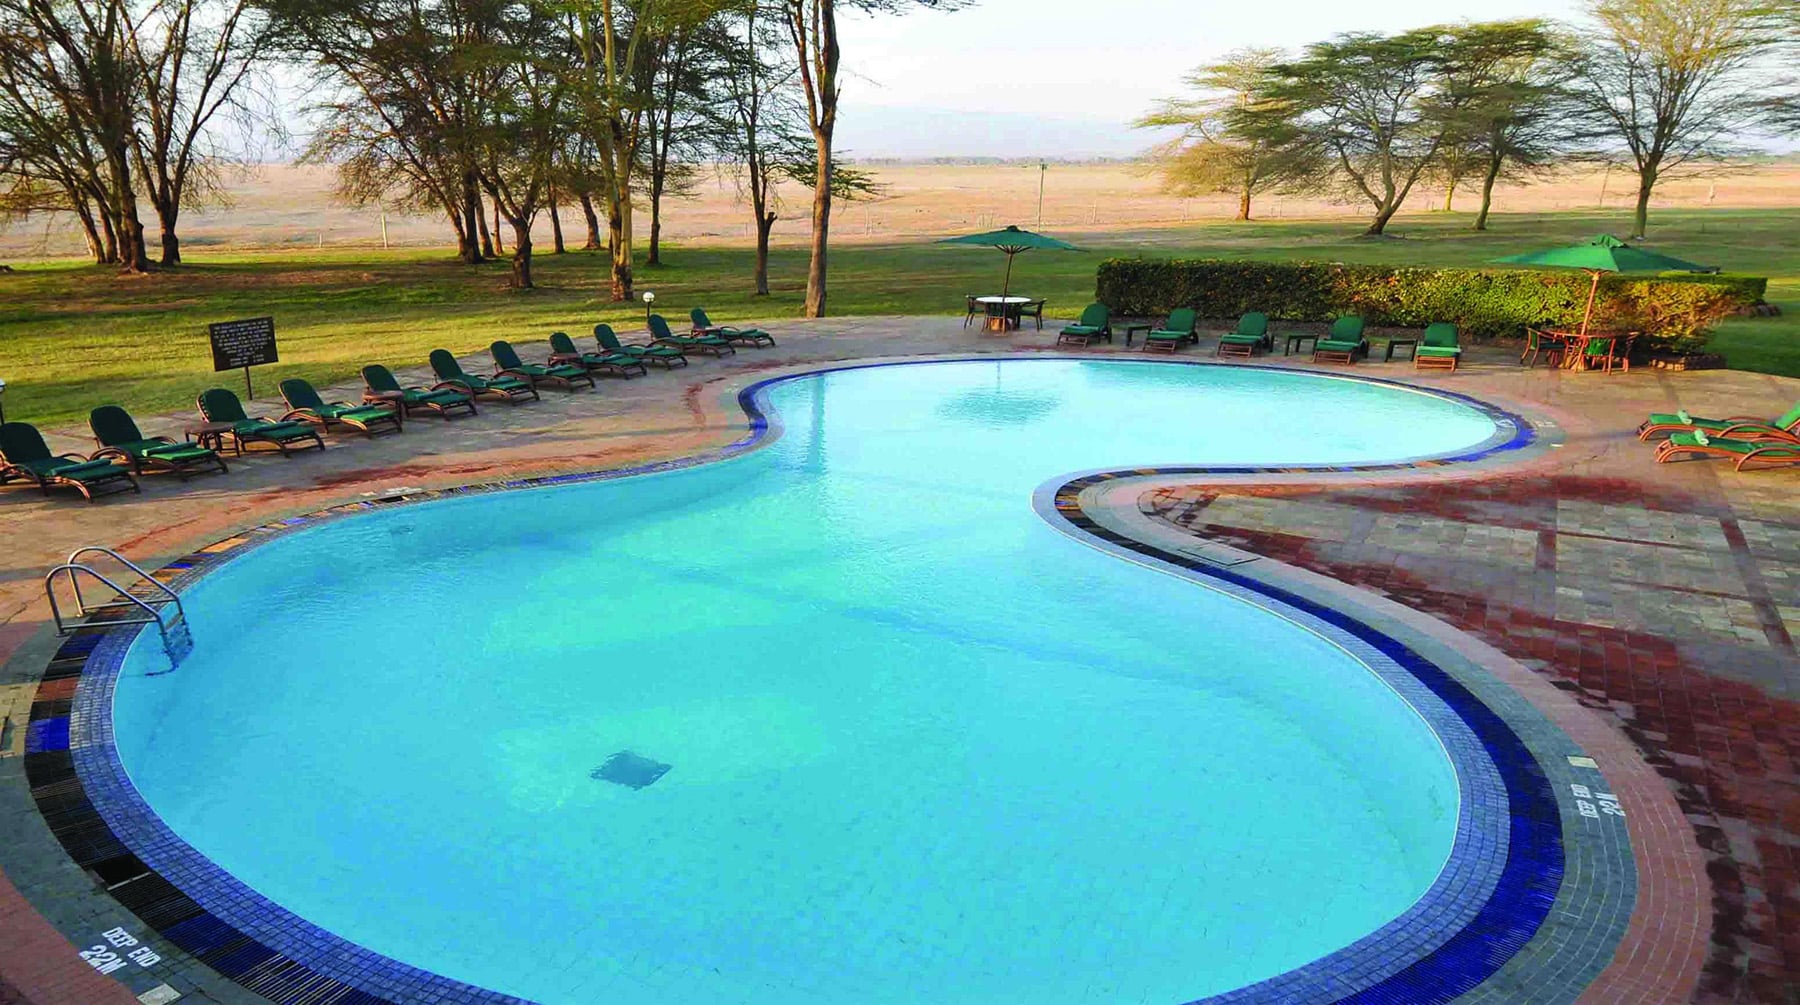 The large swimming pool at Ol Tukai Lodge, with Ker & Downey Africa